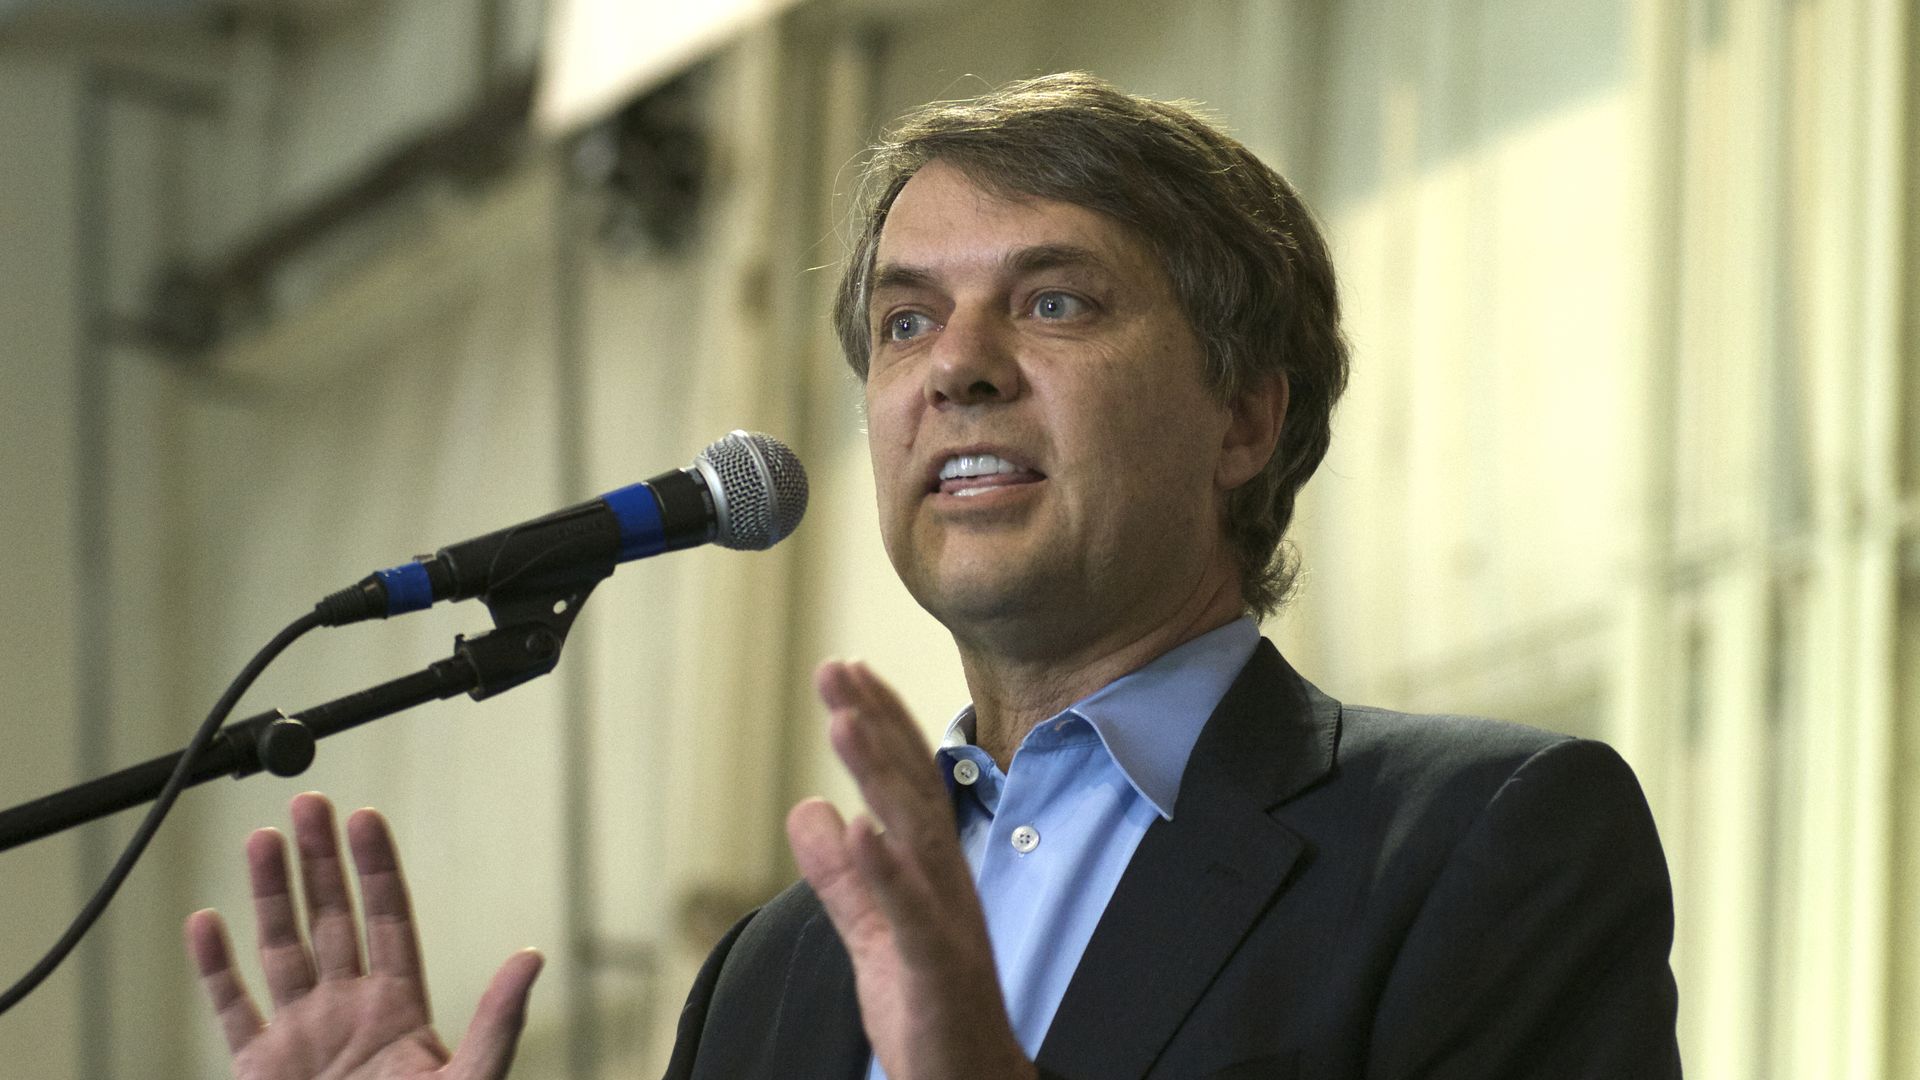 Kansas governor Jeff Colyer will sign a bill that would allow discrimination against adopting gay couples. Mark Reinstein/Corbis via Getty Images.